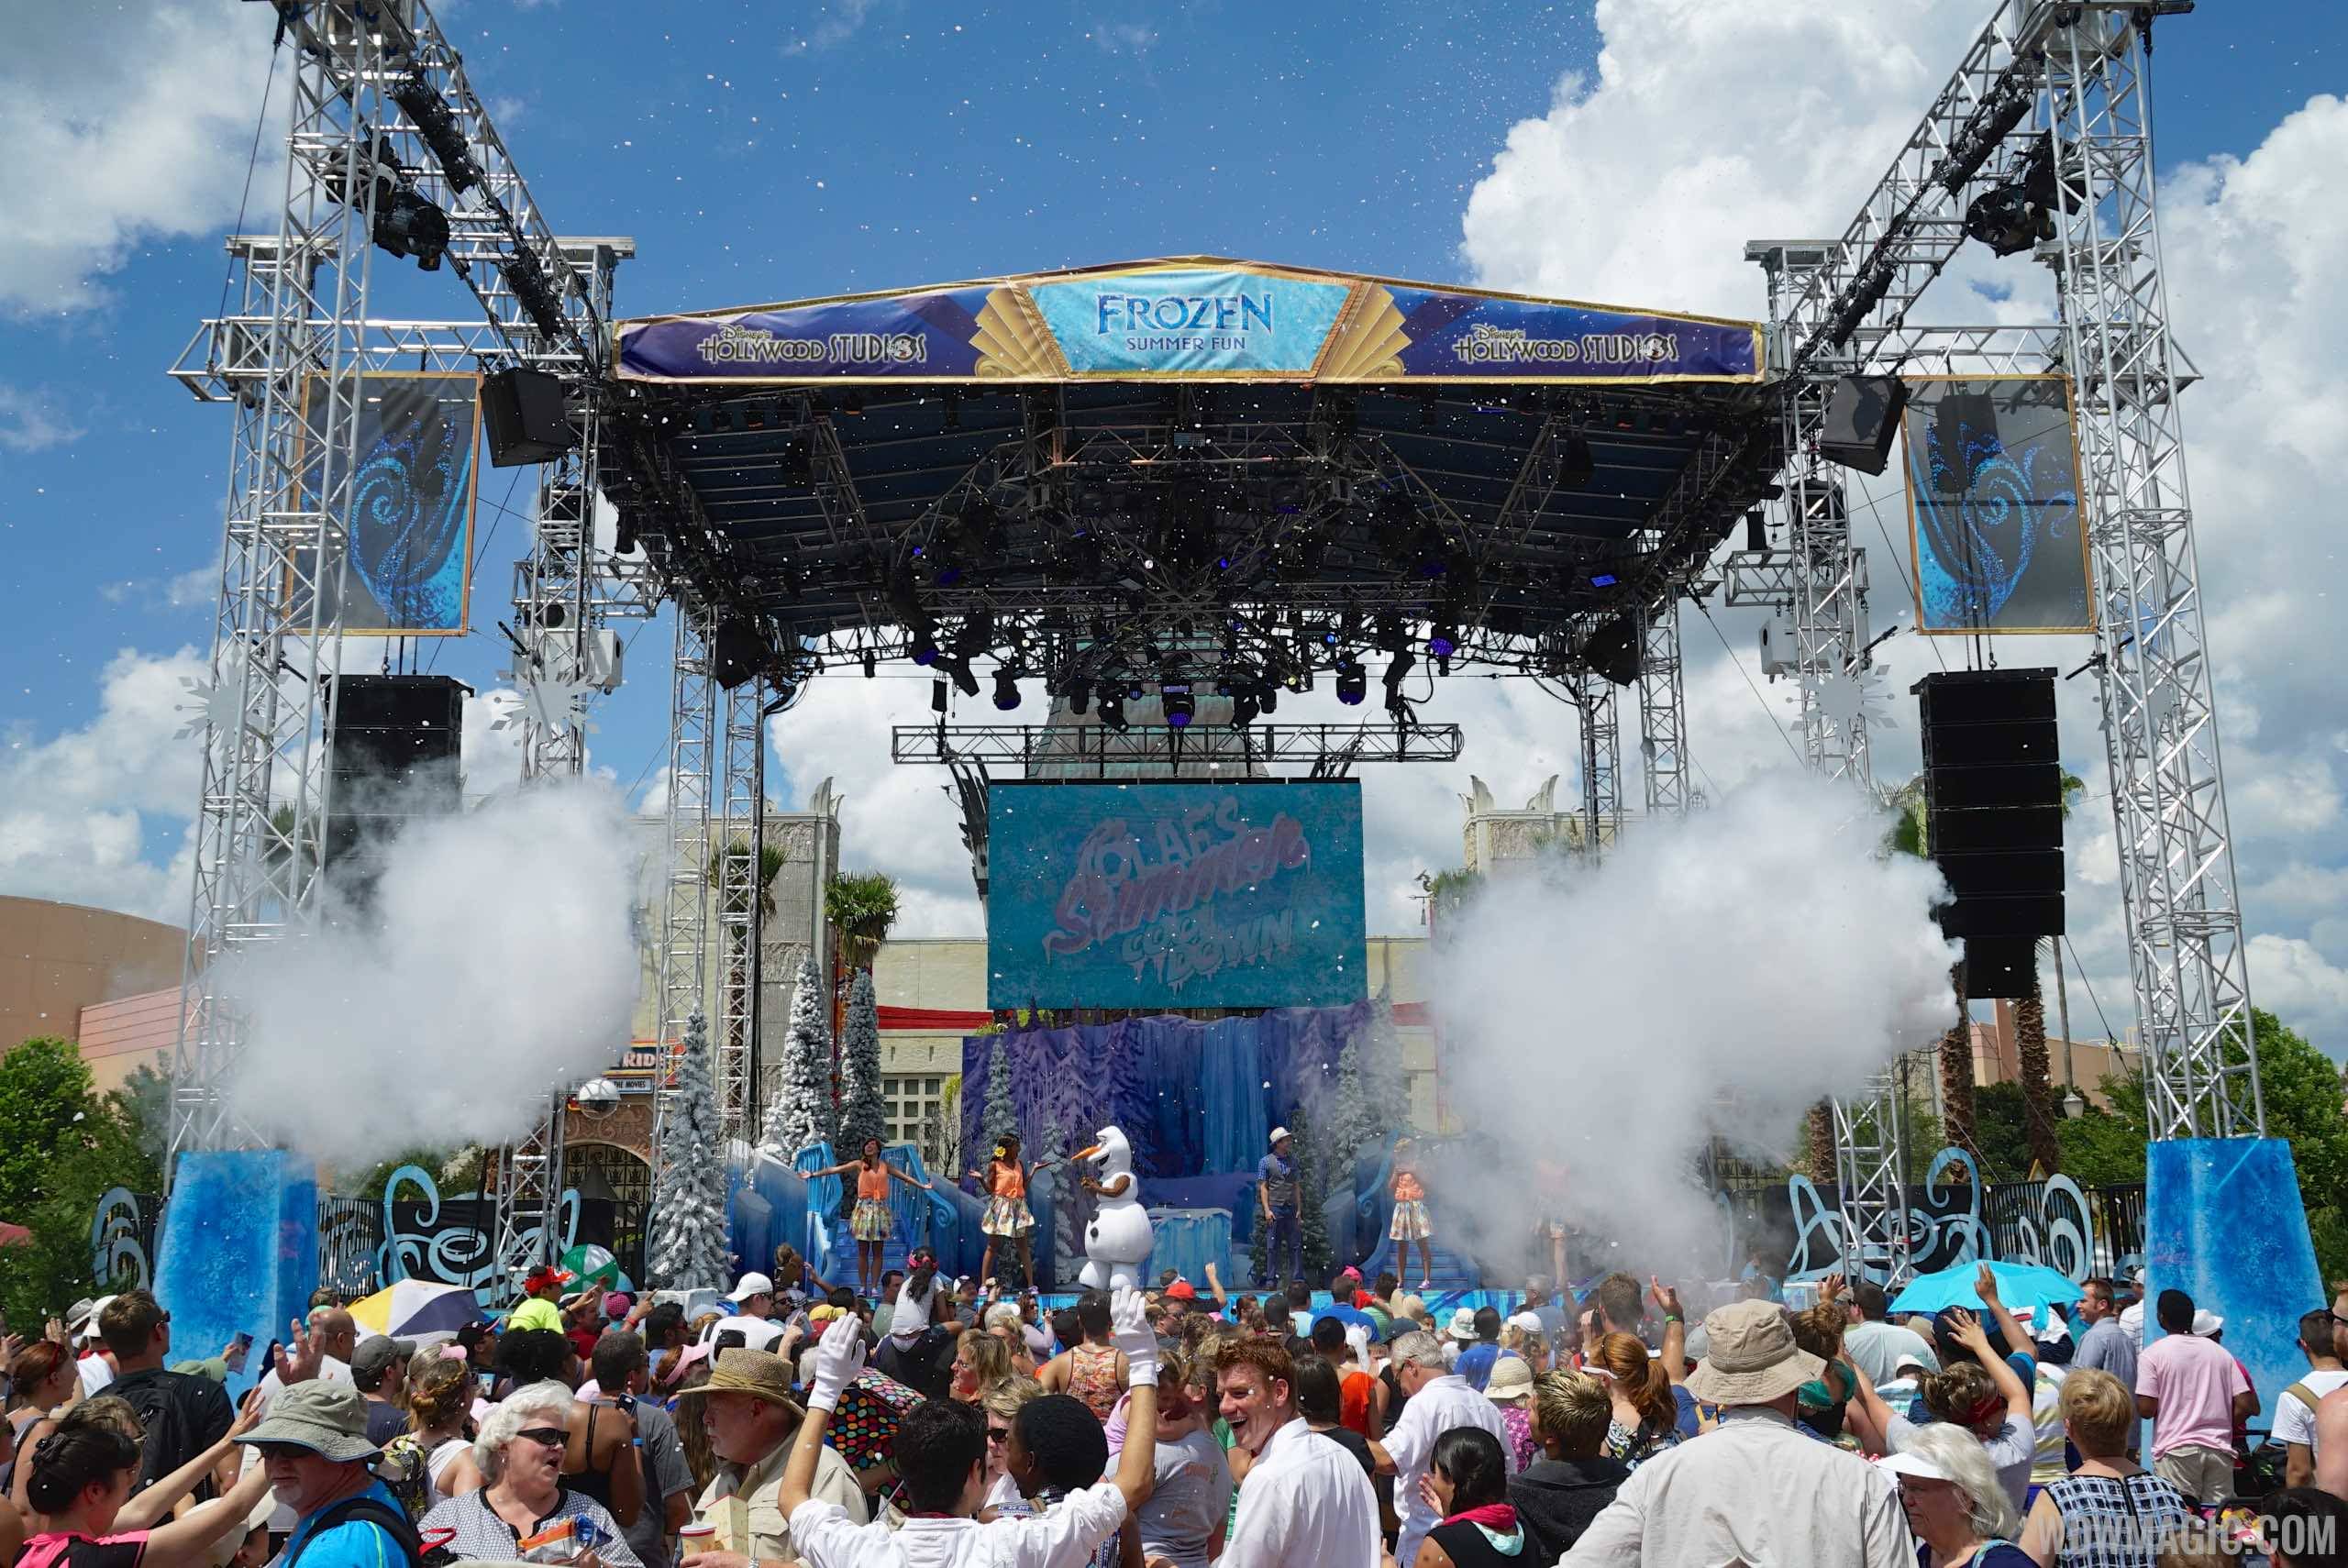 Frozen Summer Fun Premium Package available on weekends during the extended period